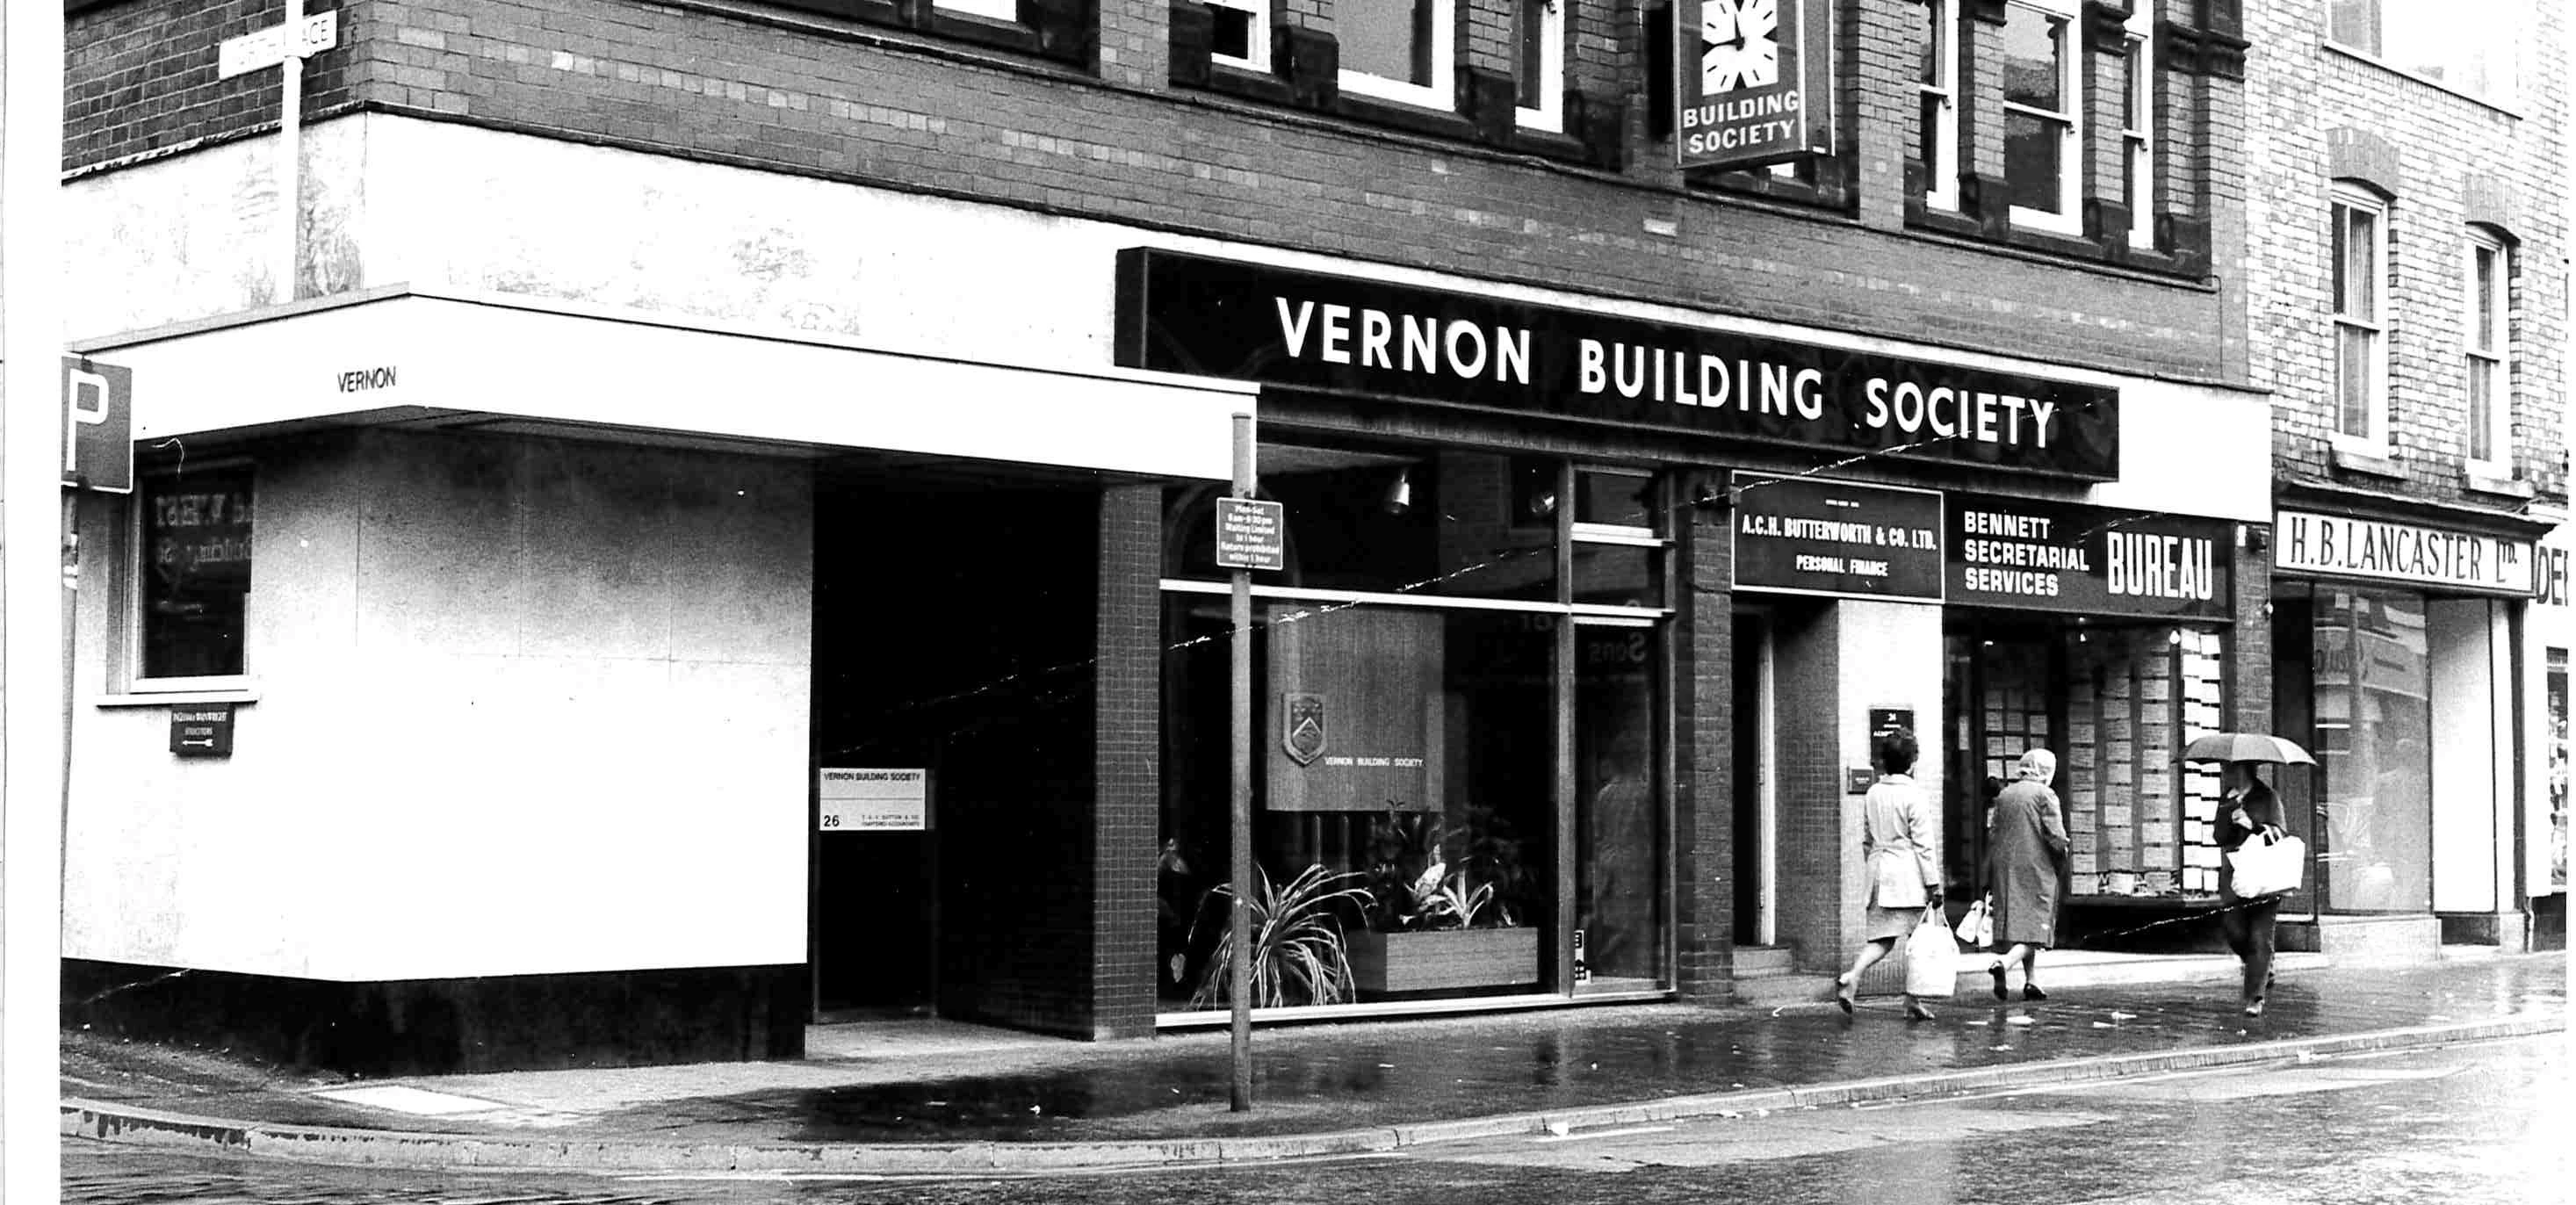 The first ever Vernon Building Society was opened in 1924 in Stockport.jpg